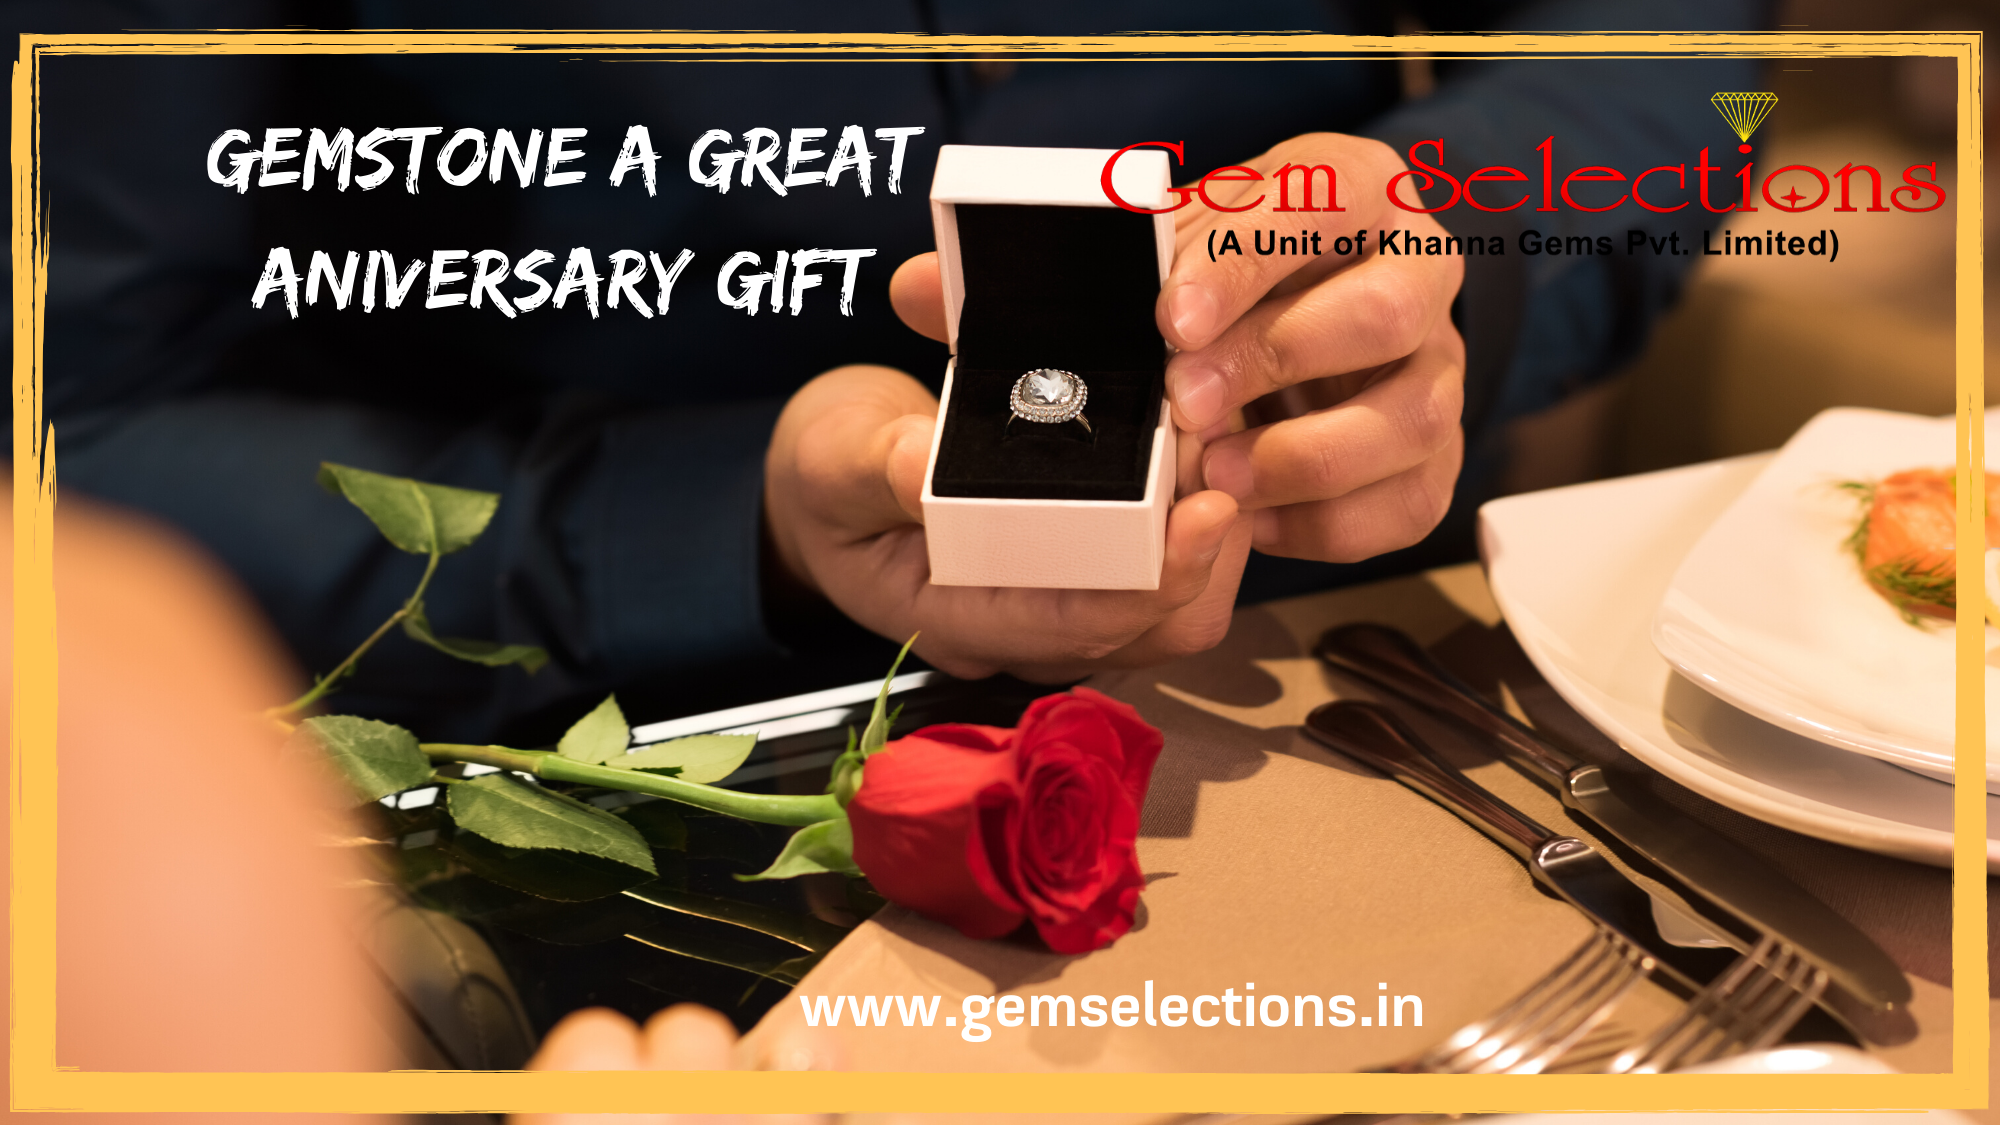 Gemstone as a great anniversary gift